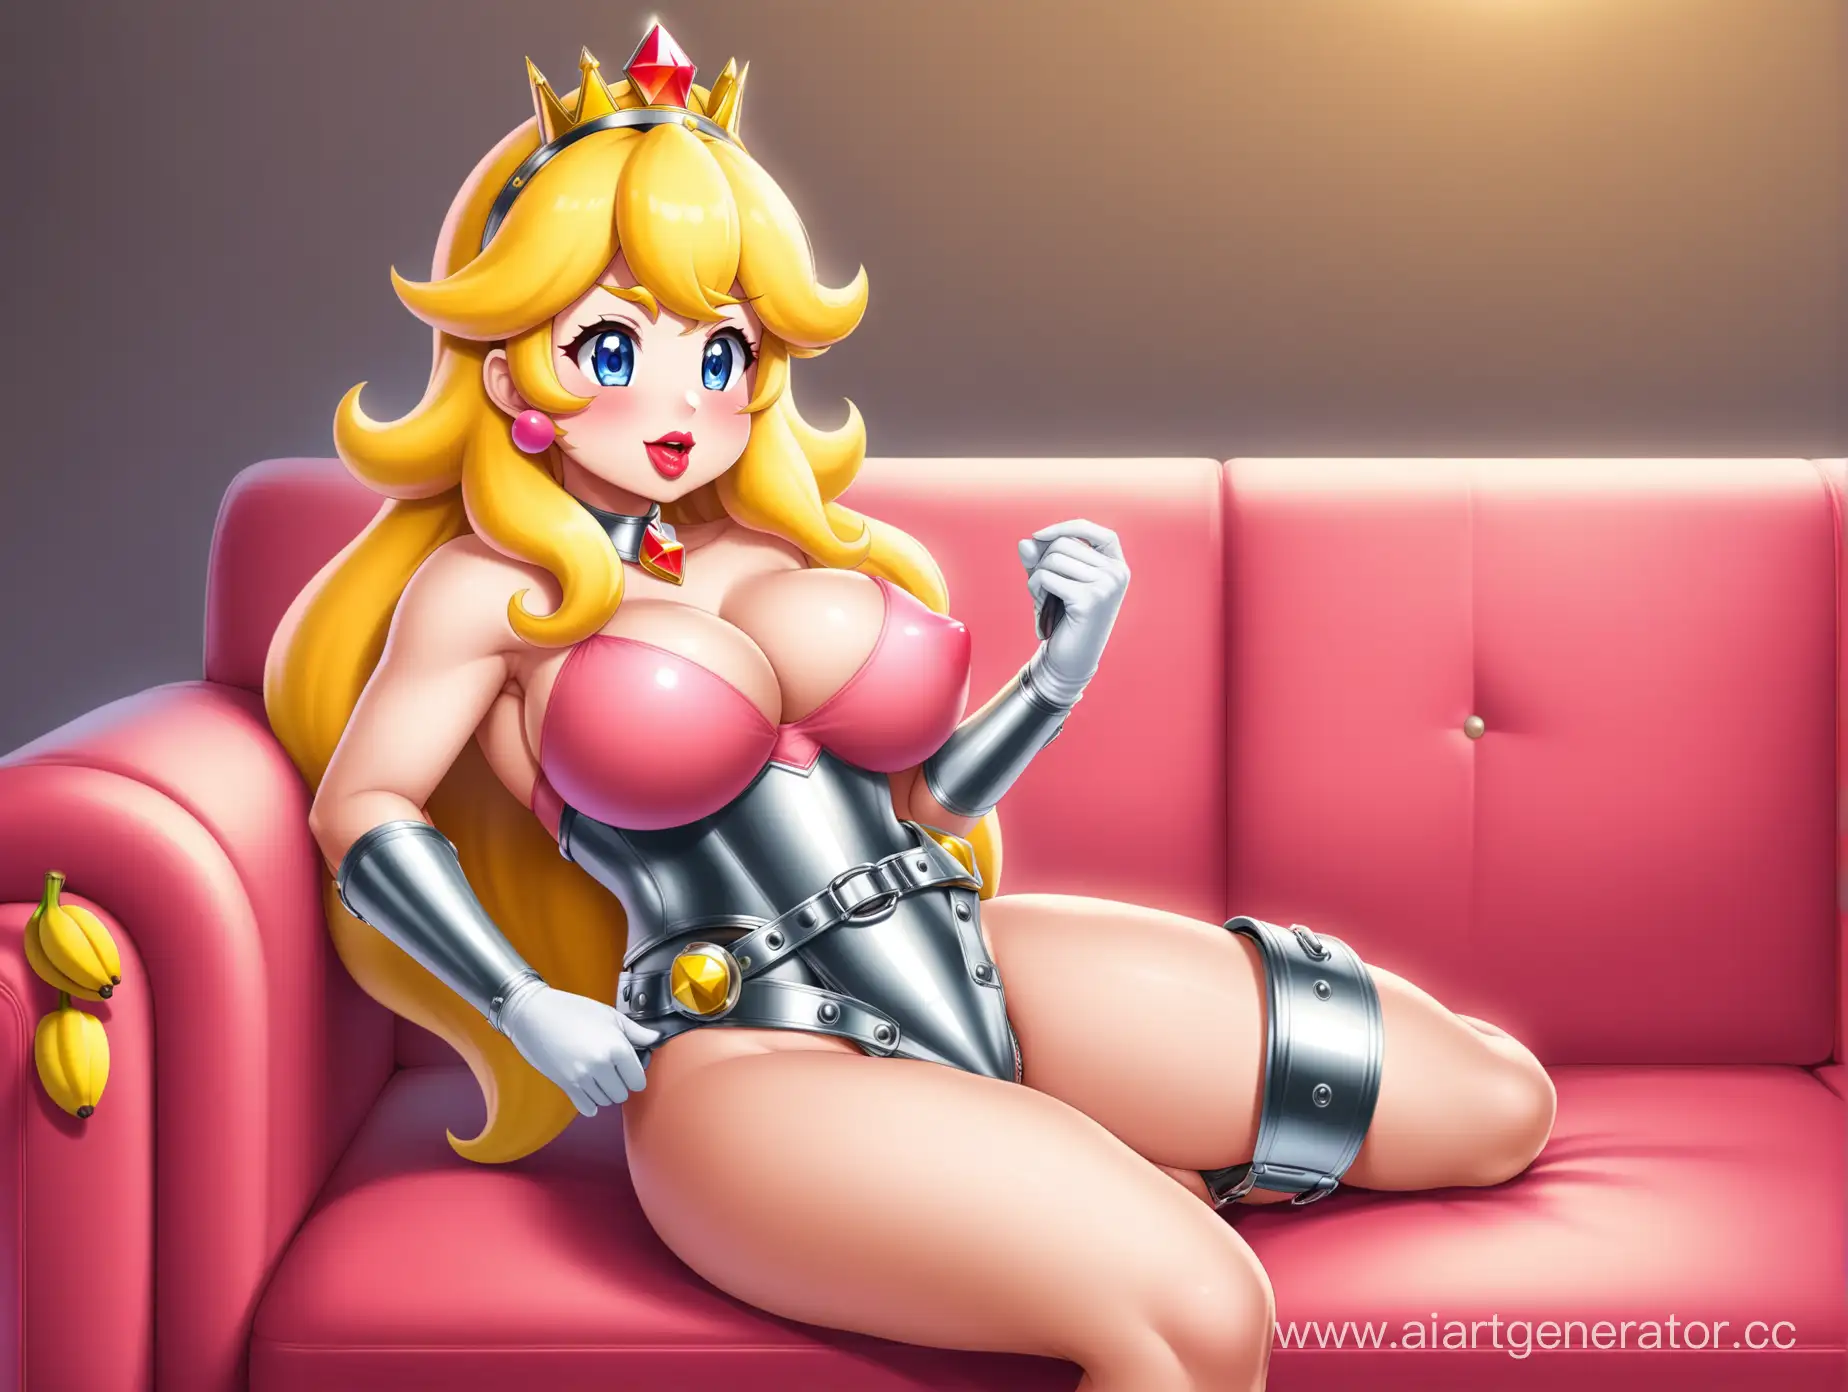 princess Peach with big silicone red lips. big silicone breasts . Eat banana.
sitting on the couch. wearing steel chastity belt.